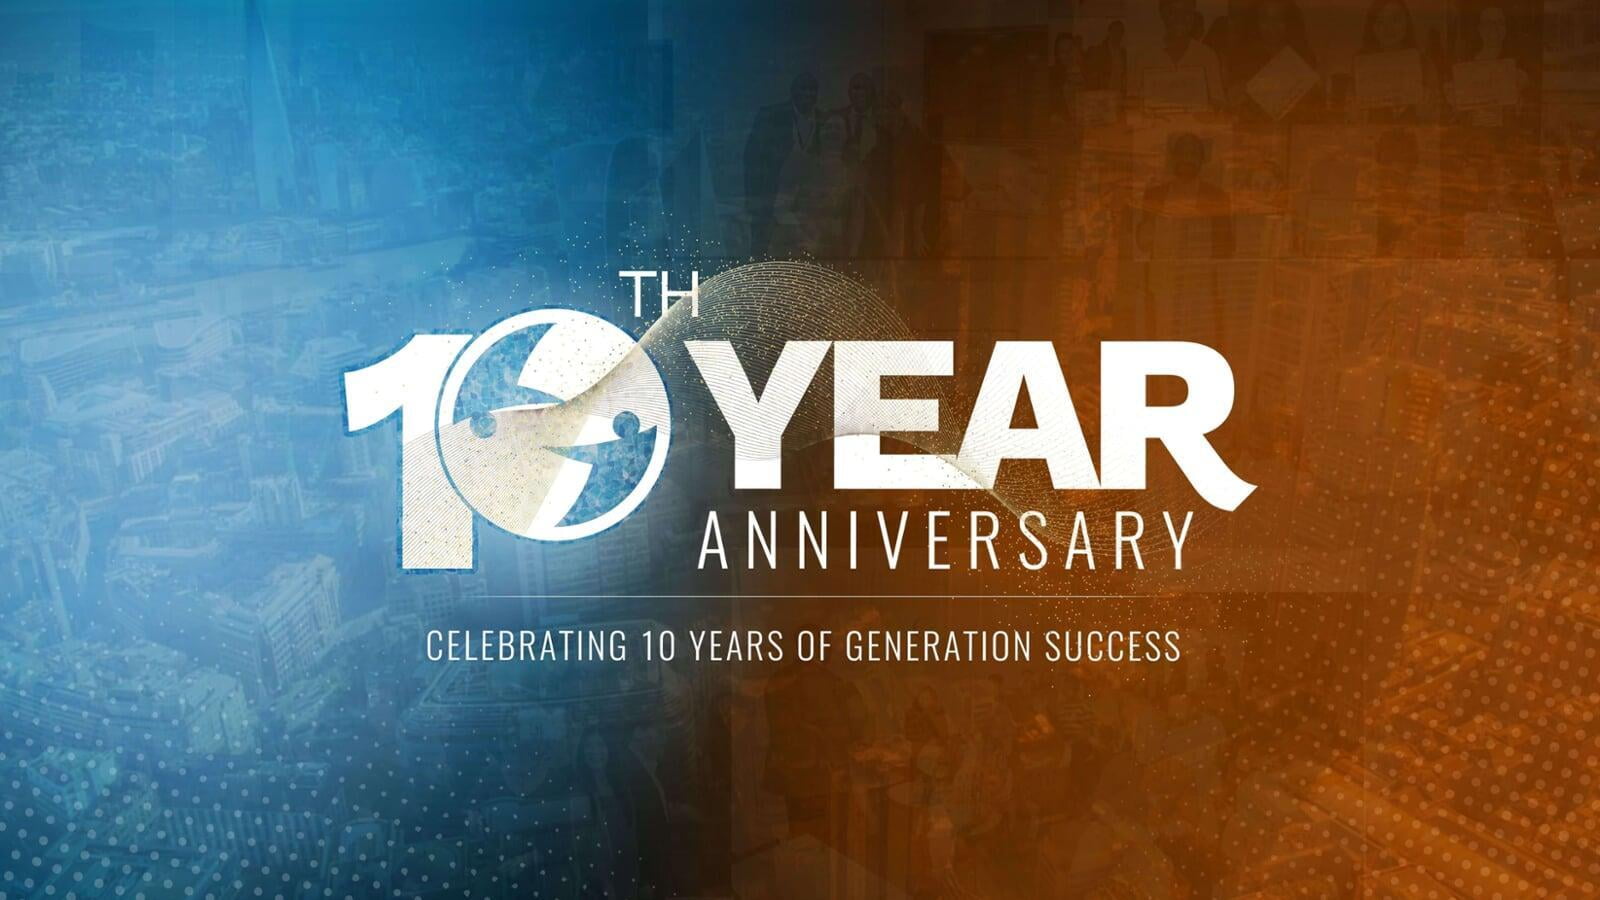 Generation Success 10-Year Anniversary / Equality Awards 